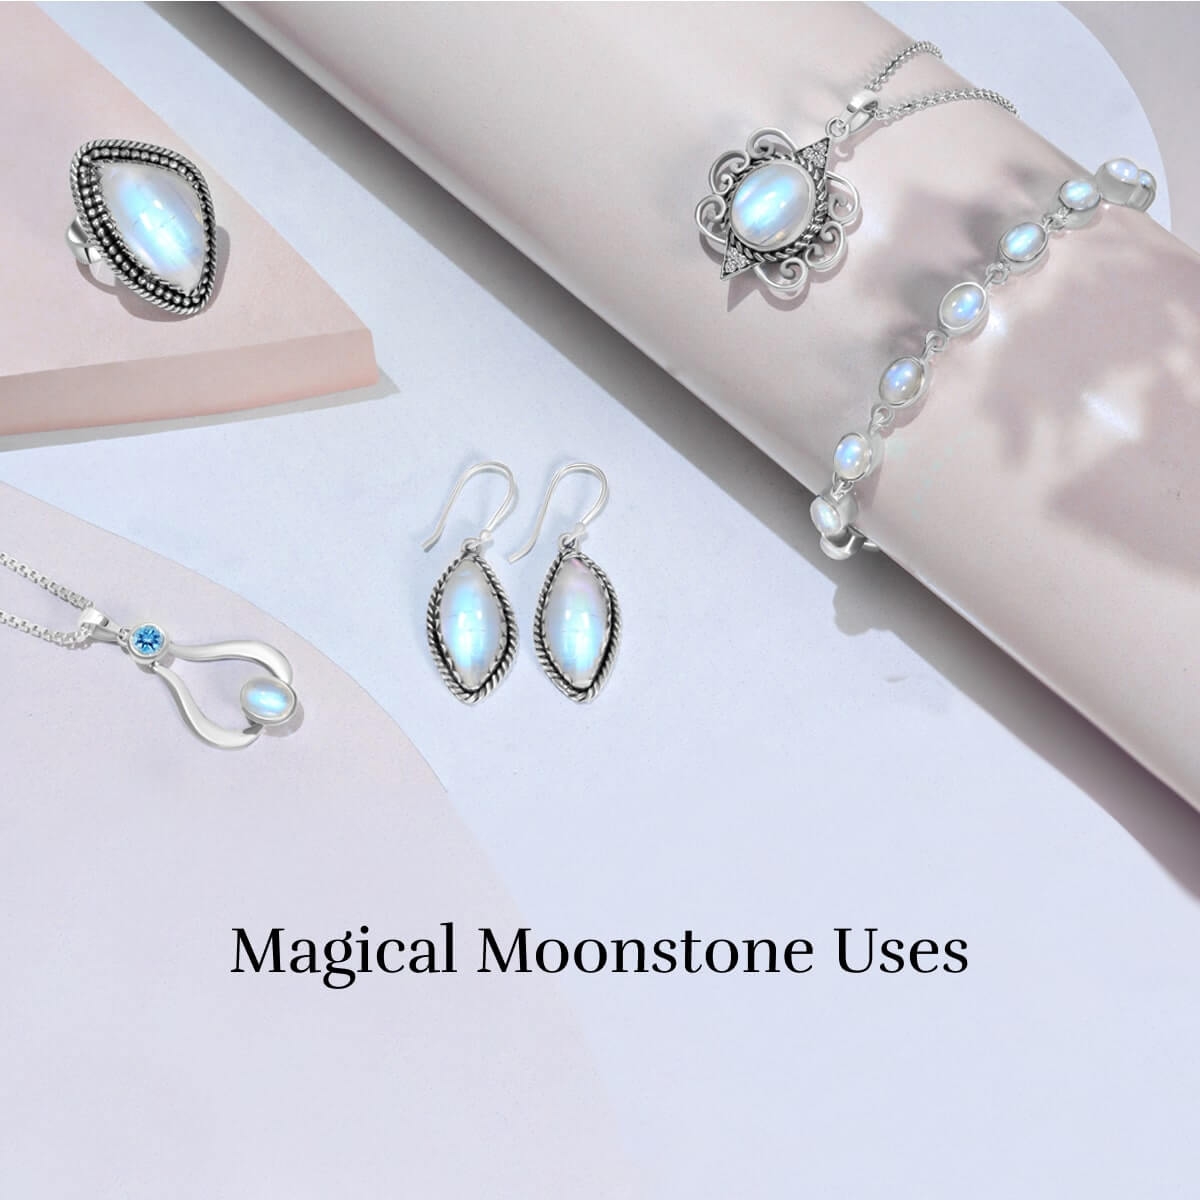 Uses of moonstone